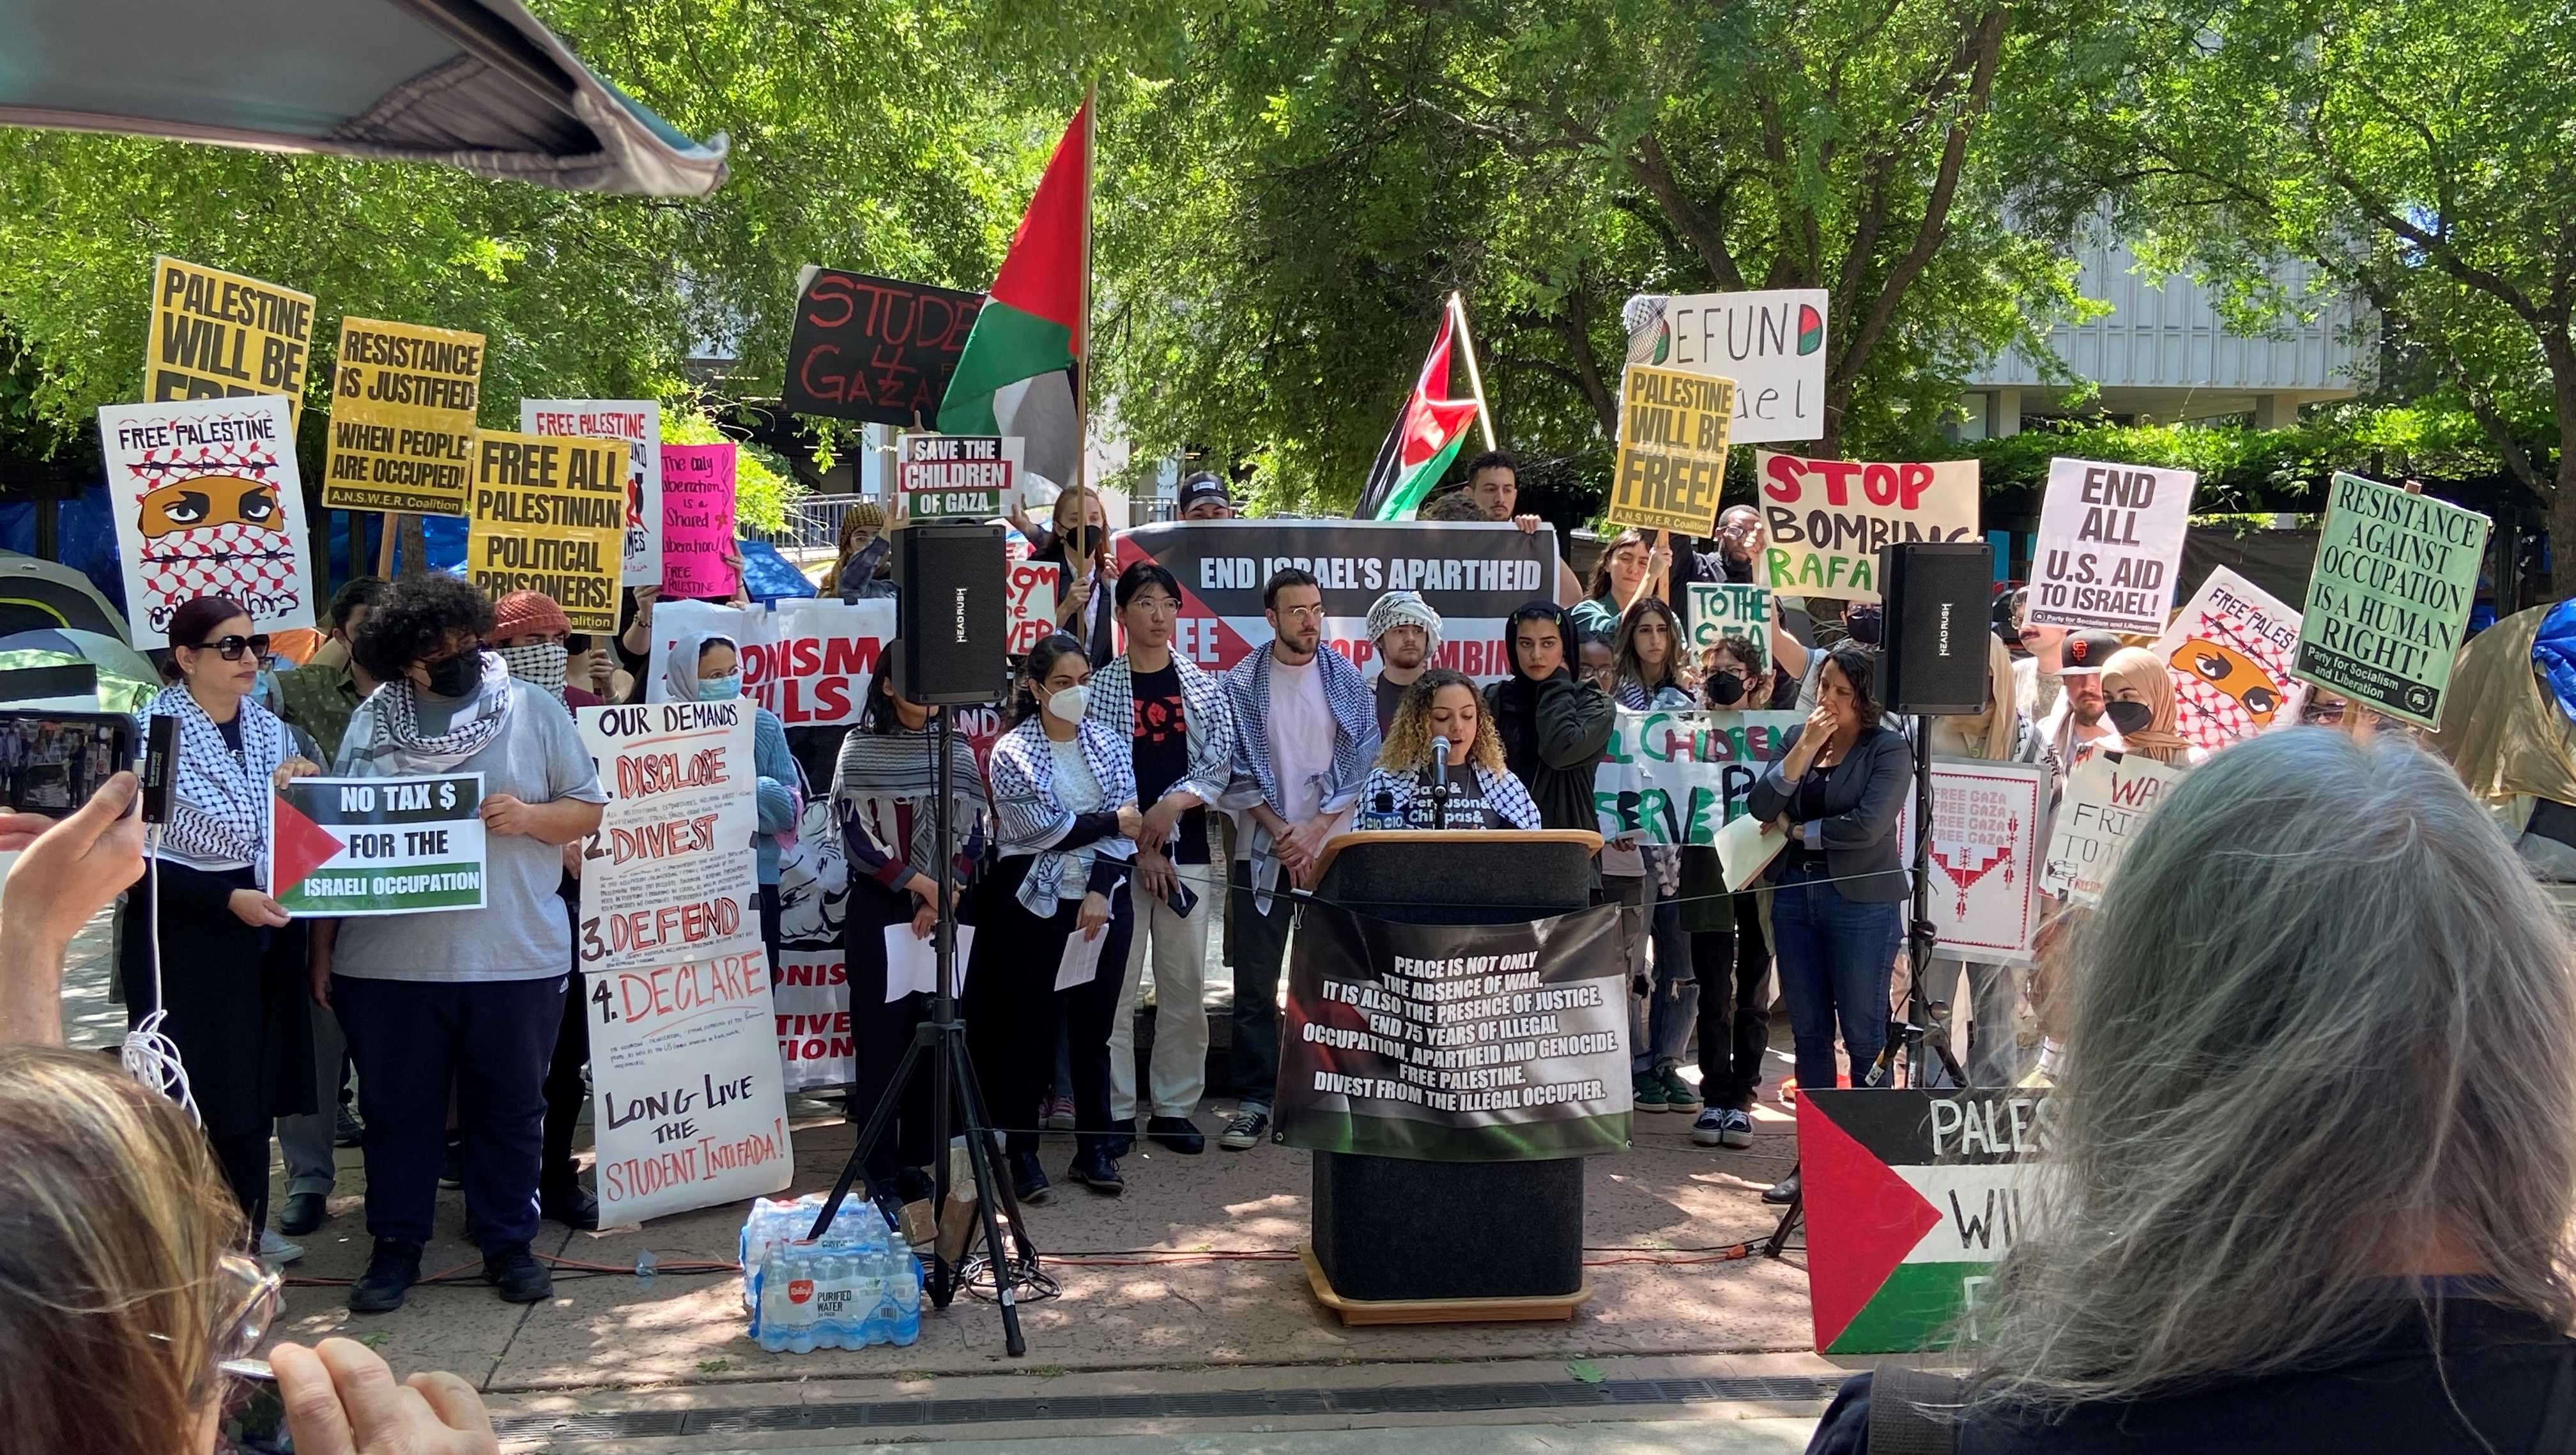 Sacramento State says 'resolution reached' with pro-Palestinian encampment, changes policy on investments